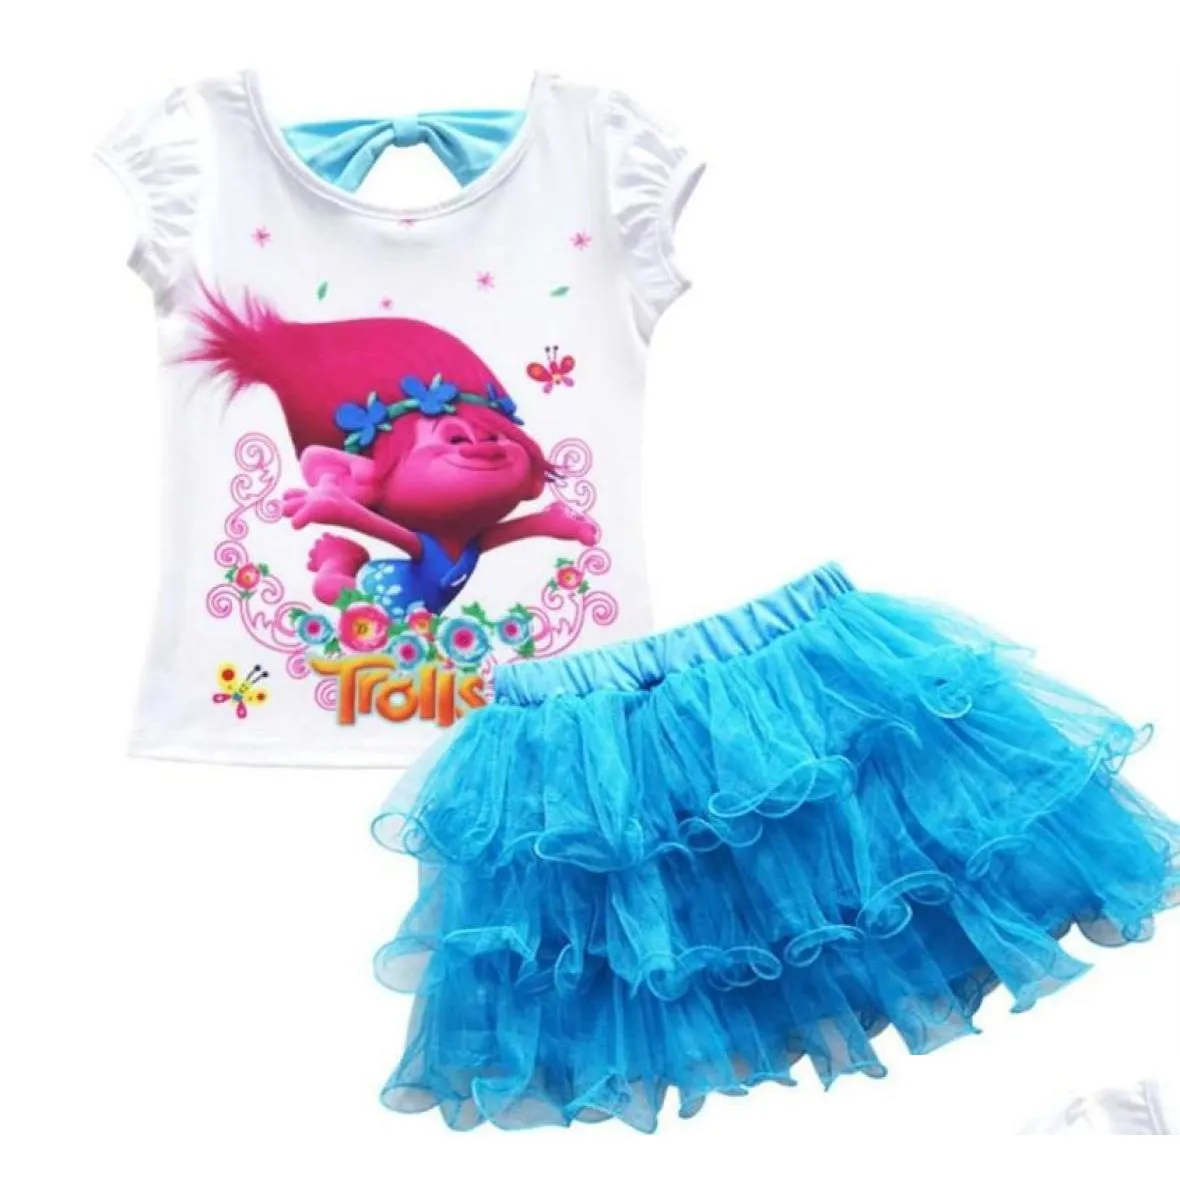 Summer Clothes Trolls Costume Kids Children Clothing Sets Tracksuits for Girls Top Tees Skirts 2 Pcs Y200325324E2974417